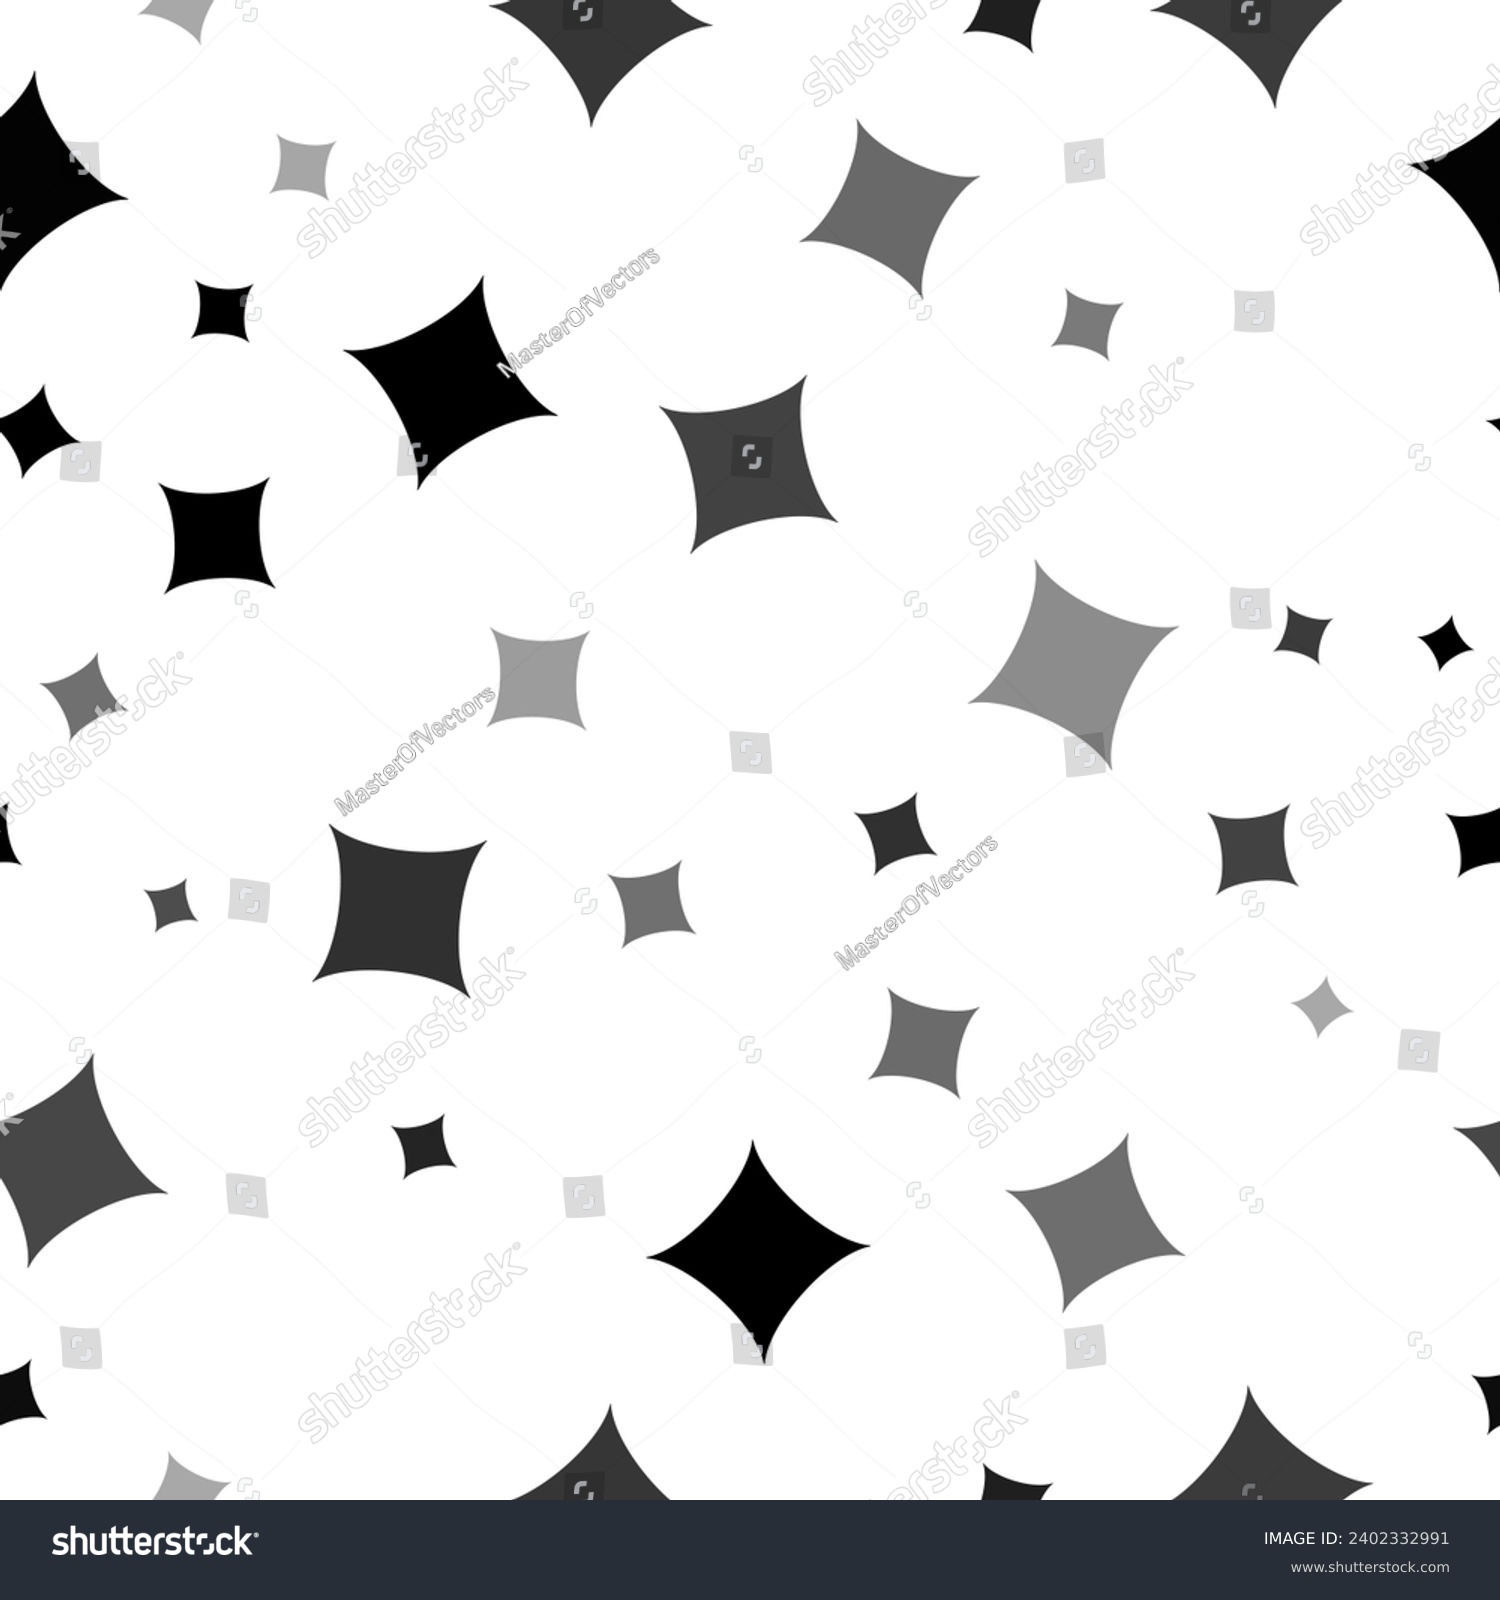 SVG of Seamless vector pattern with star symbols, creating a creative monochrome background with rotated elements. Vector illustration on white background svg